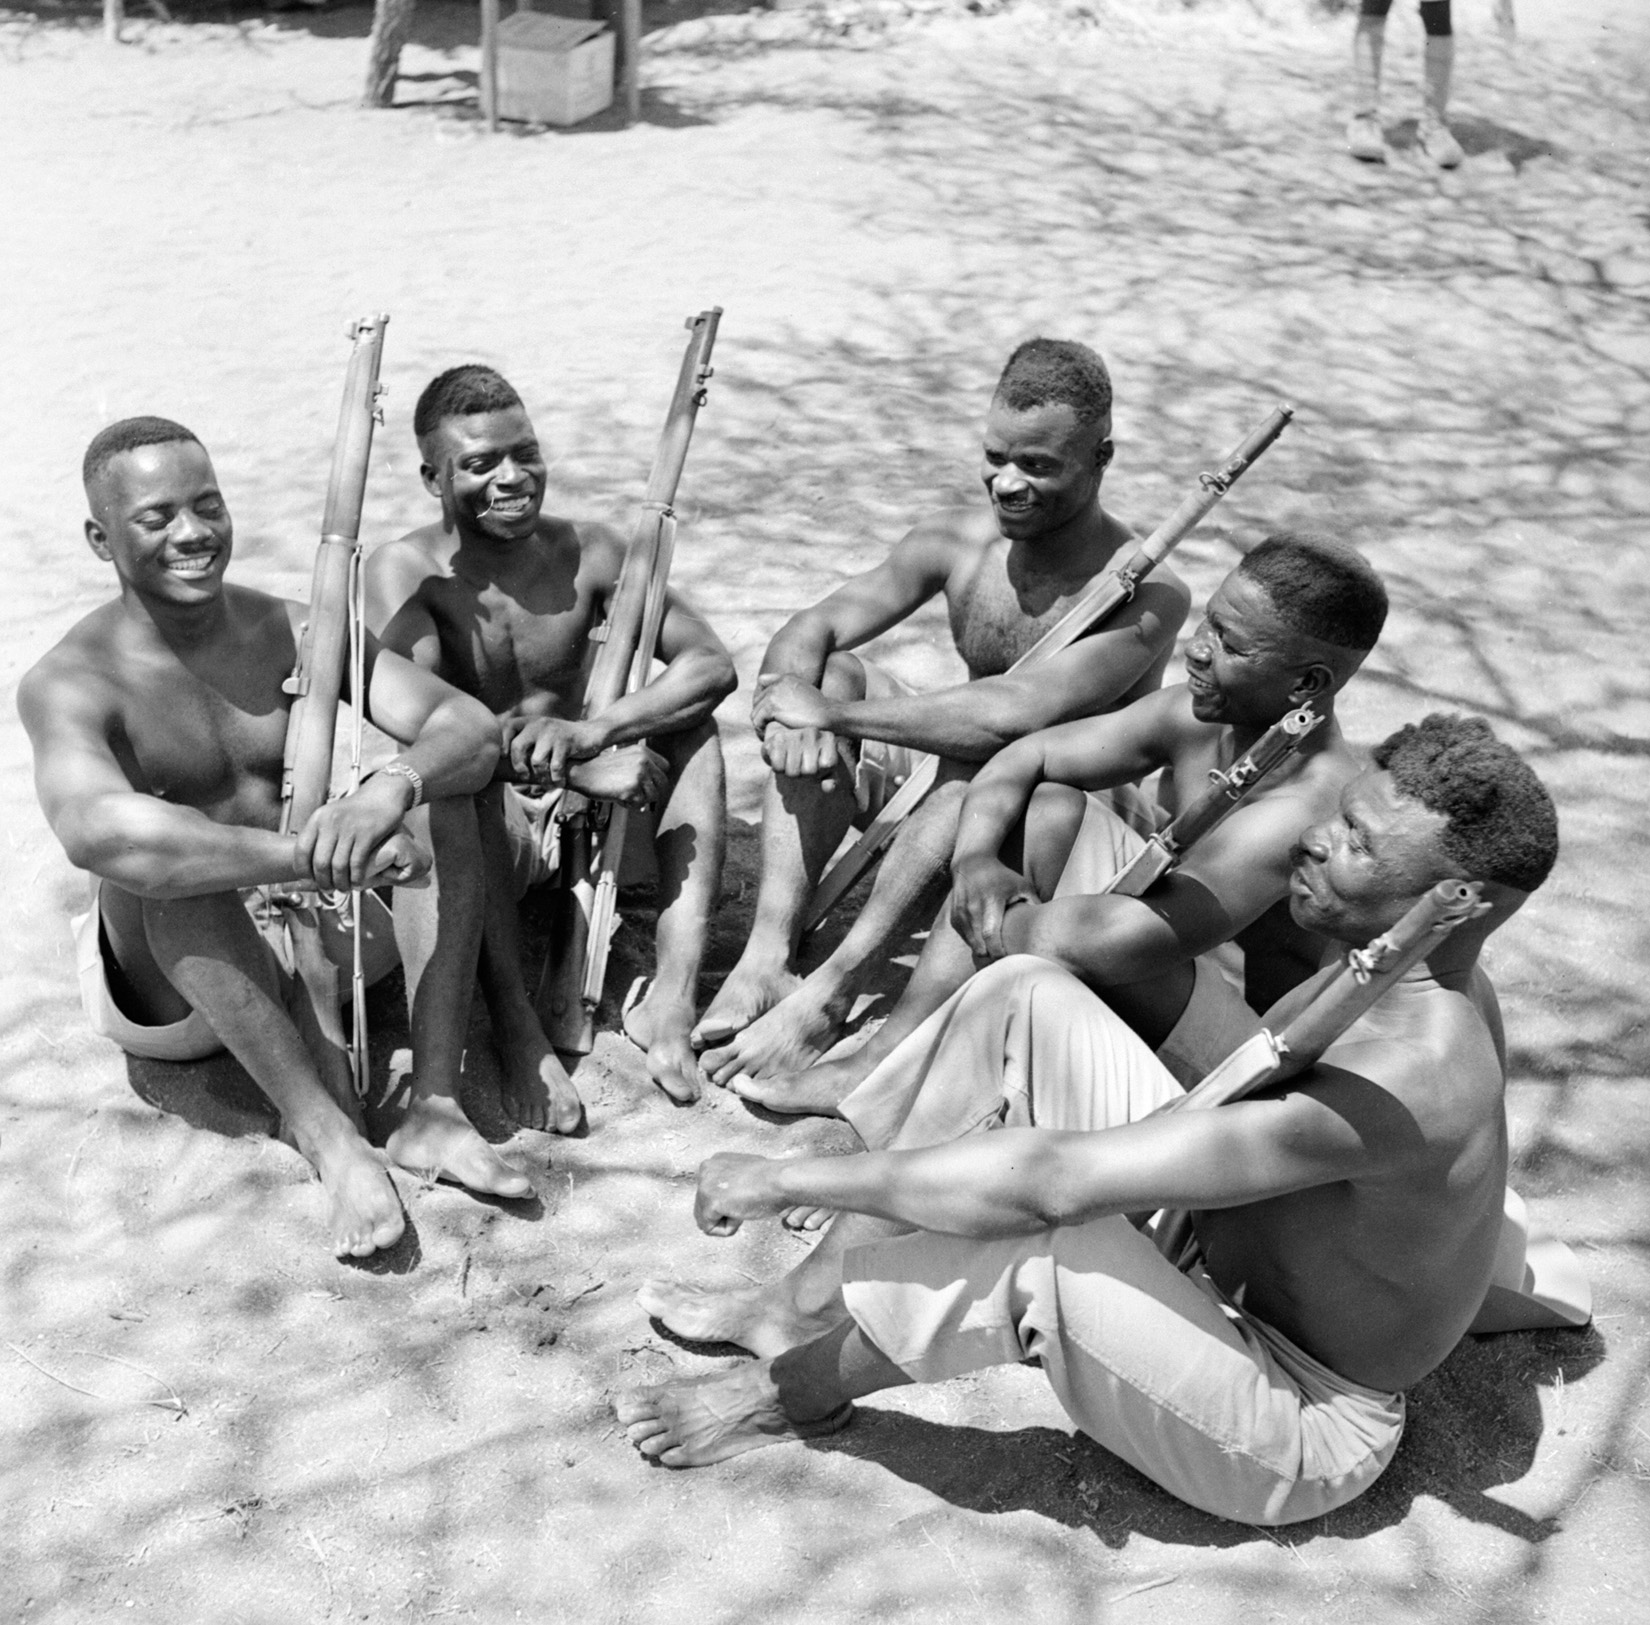 Soldiers of the King’s African Rifles (KAR) during the British advance into Italian Somaliland in February 1941. The unit, a British Colonial Regiment, was raised in East Africa in 1902, and served until independence in the 1960s. 